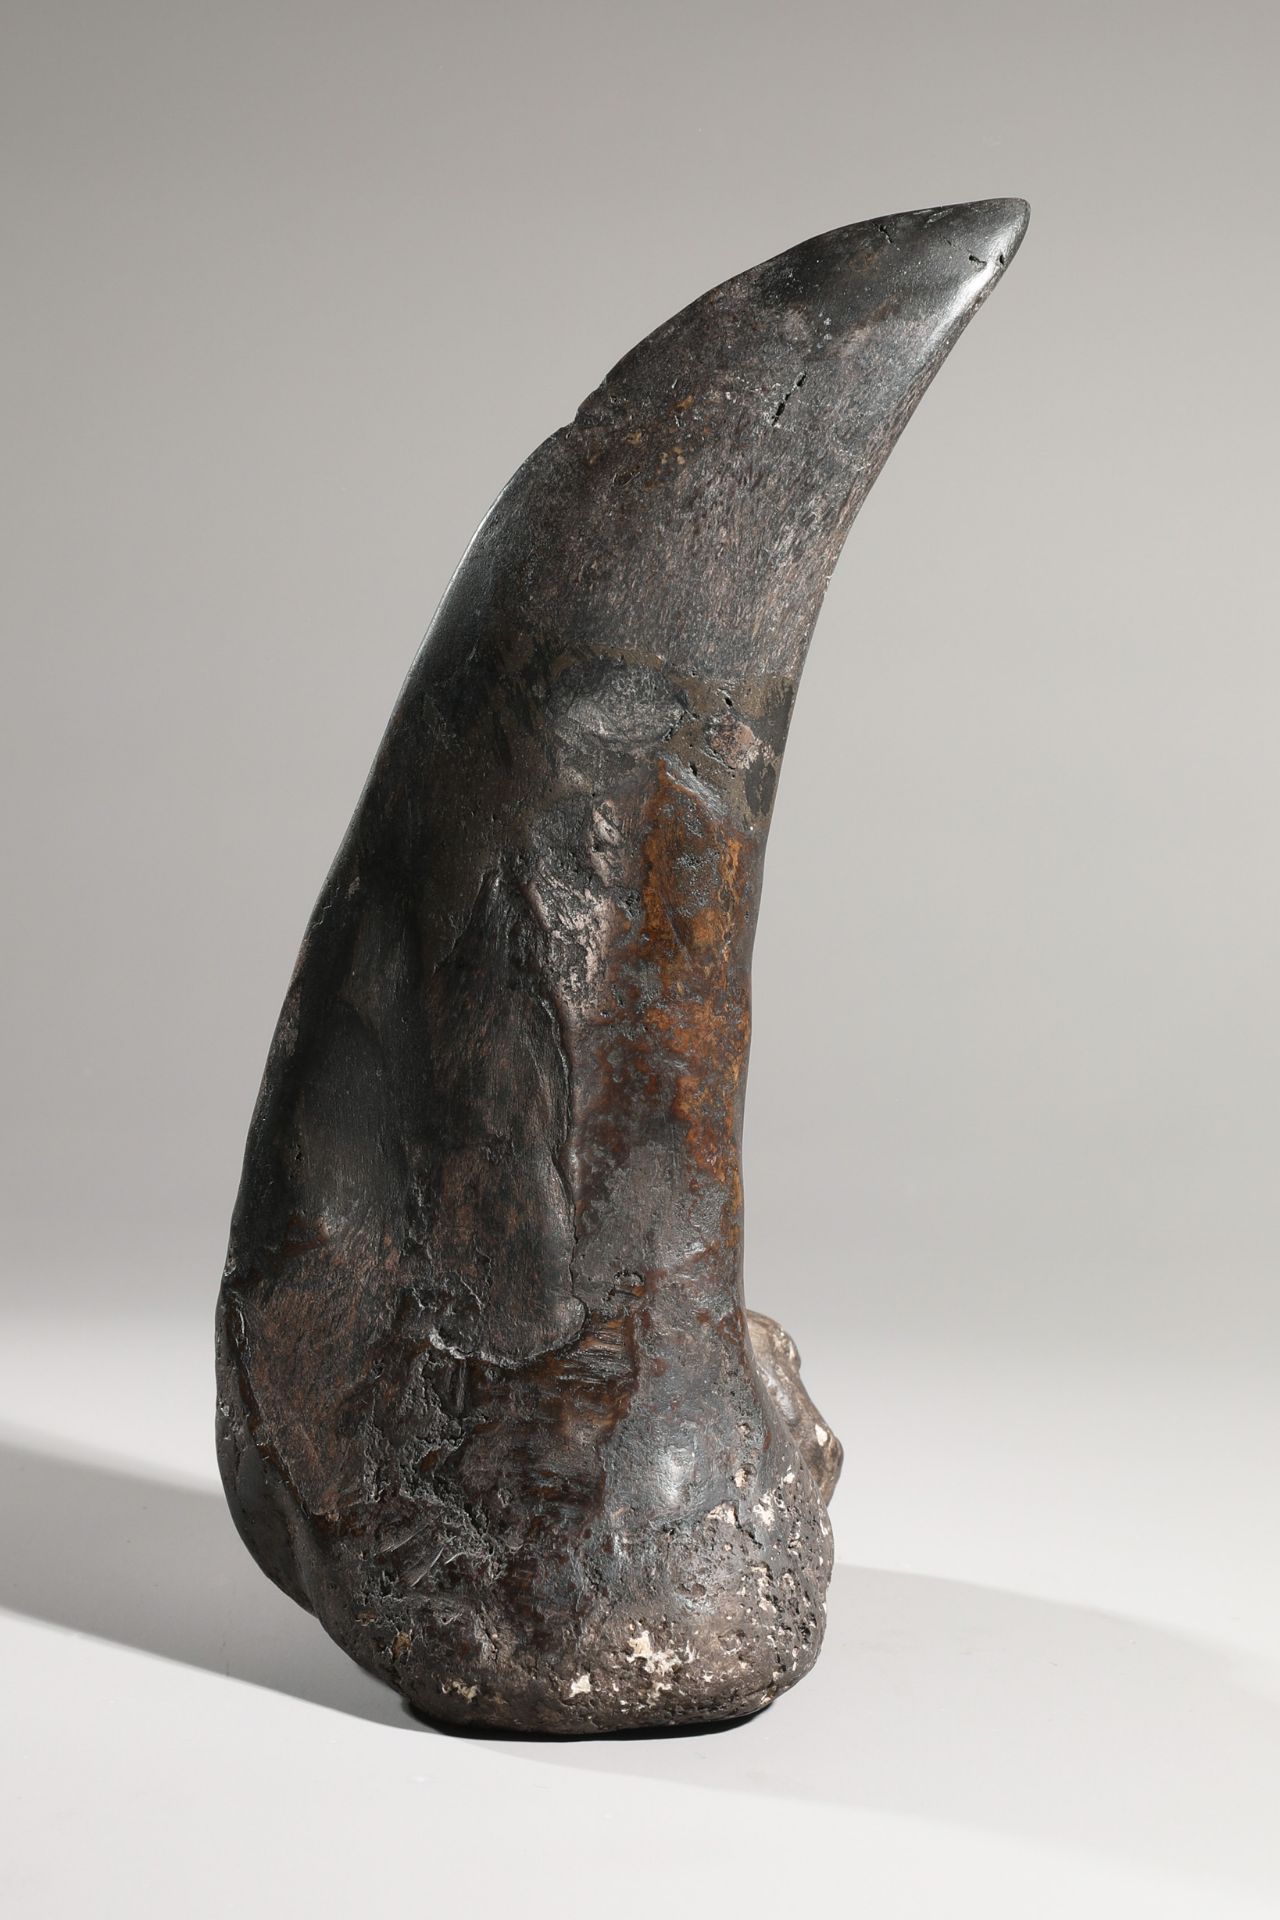 Dinosaur claw, fossilized - Image 3 of 4